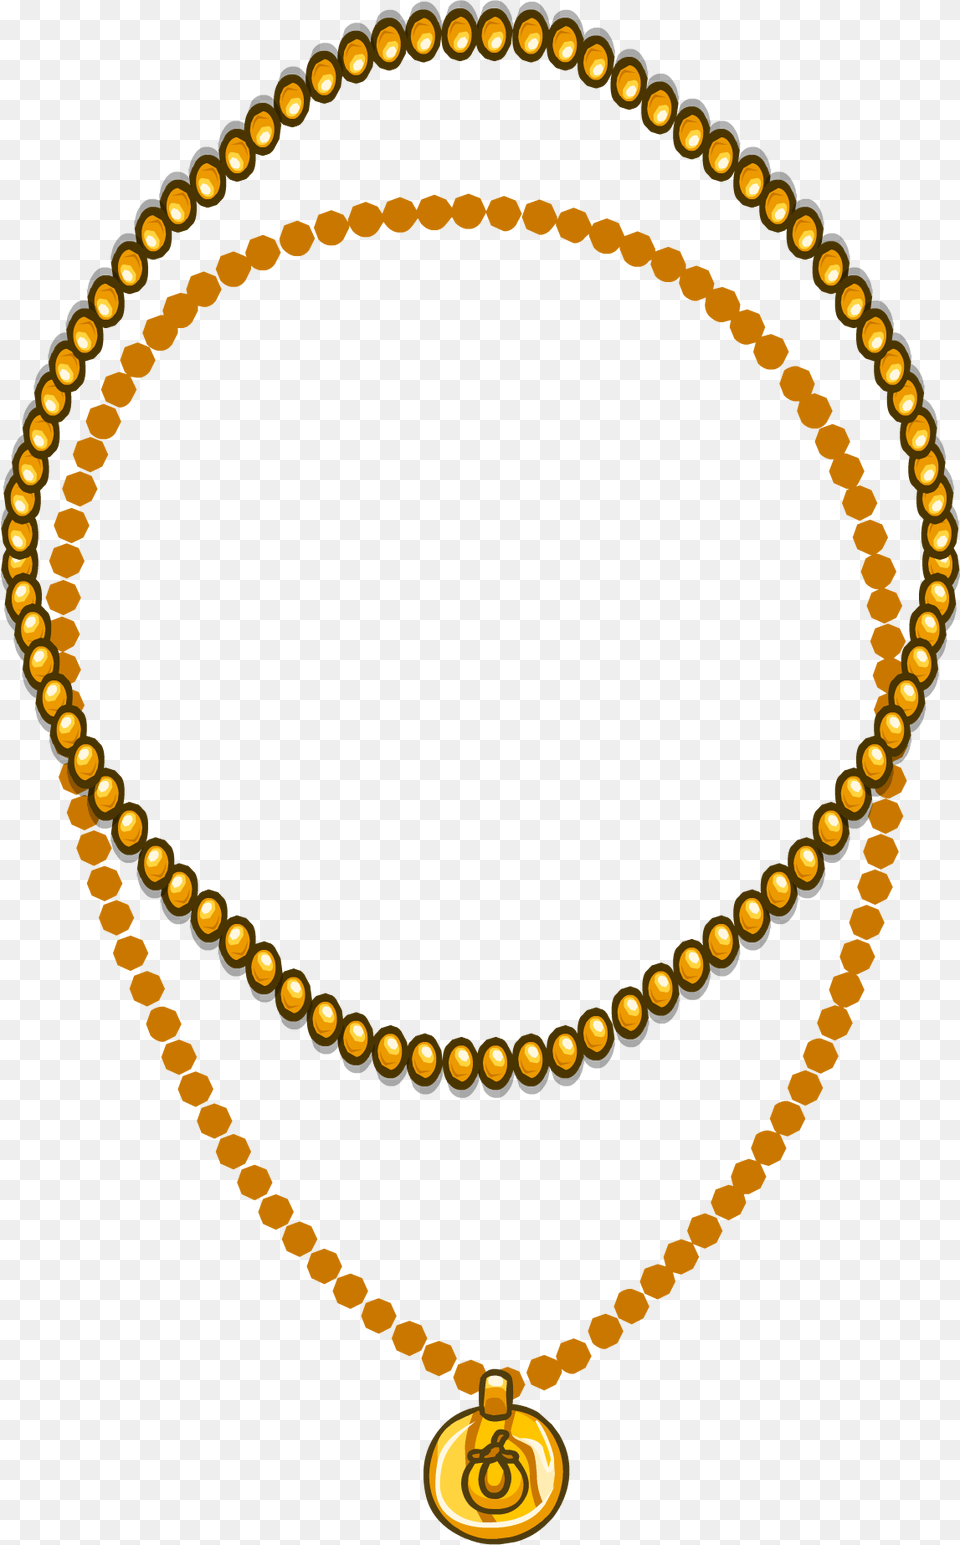 Oberrynecklacehi 10 Gram Gold Chain Designs With Price, Accessories, Bead, Bead Necklace, Jewelry Png